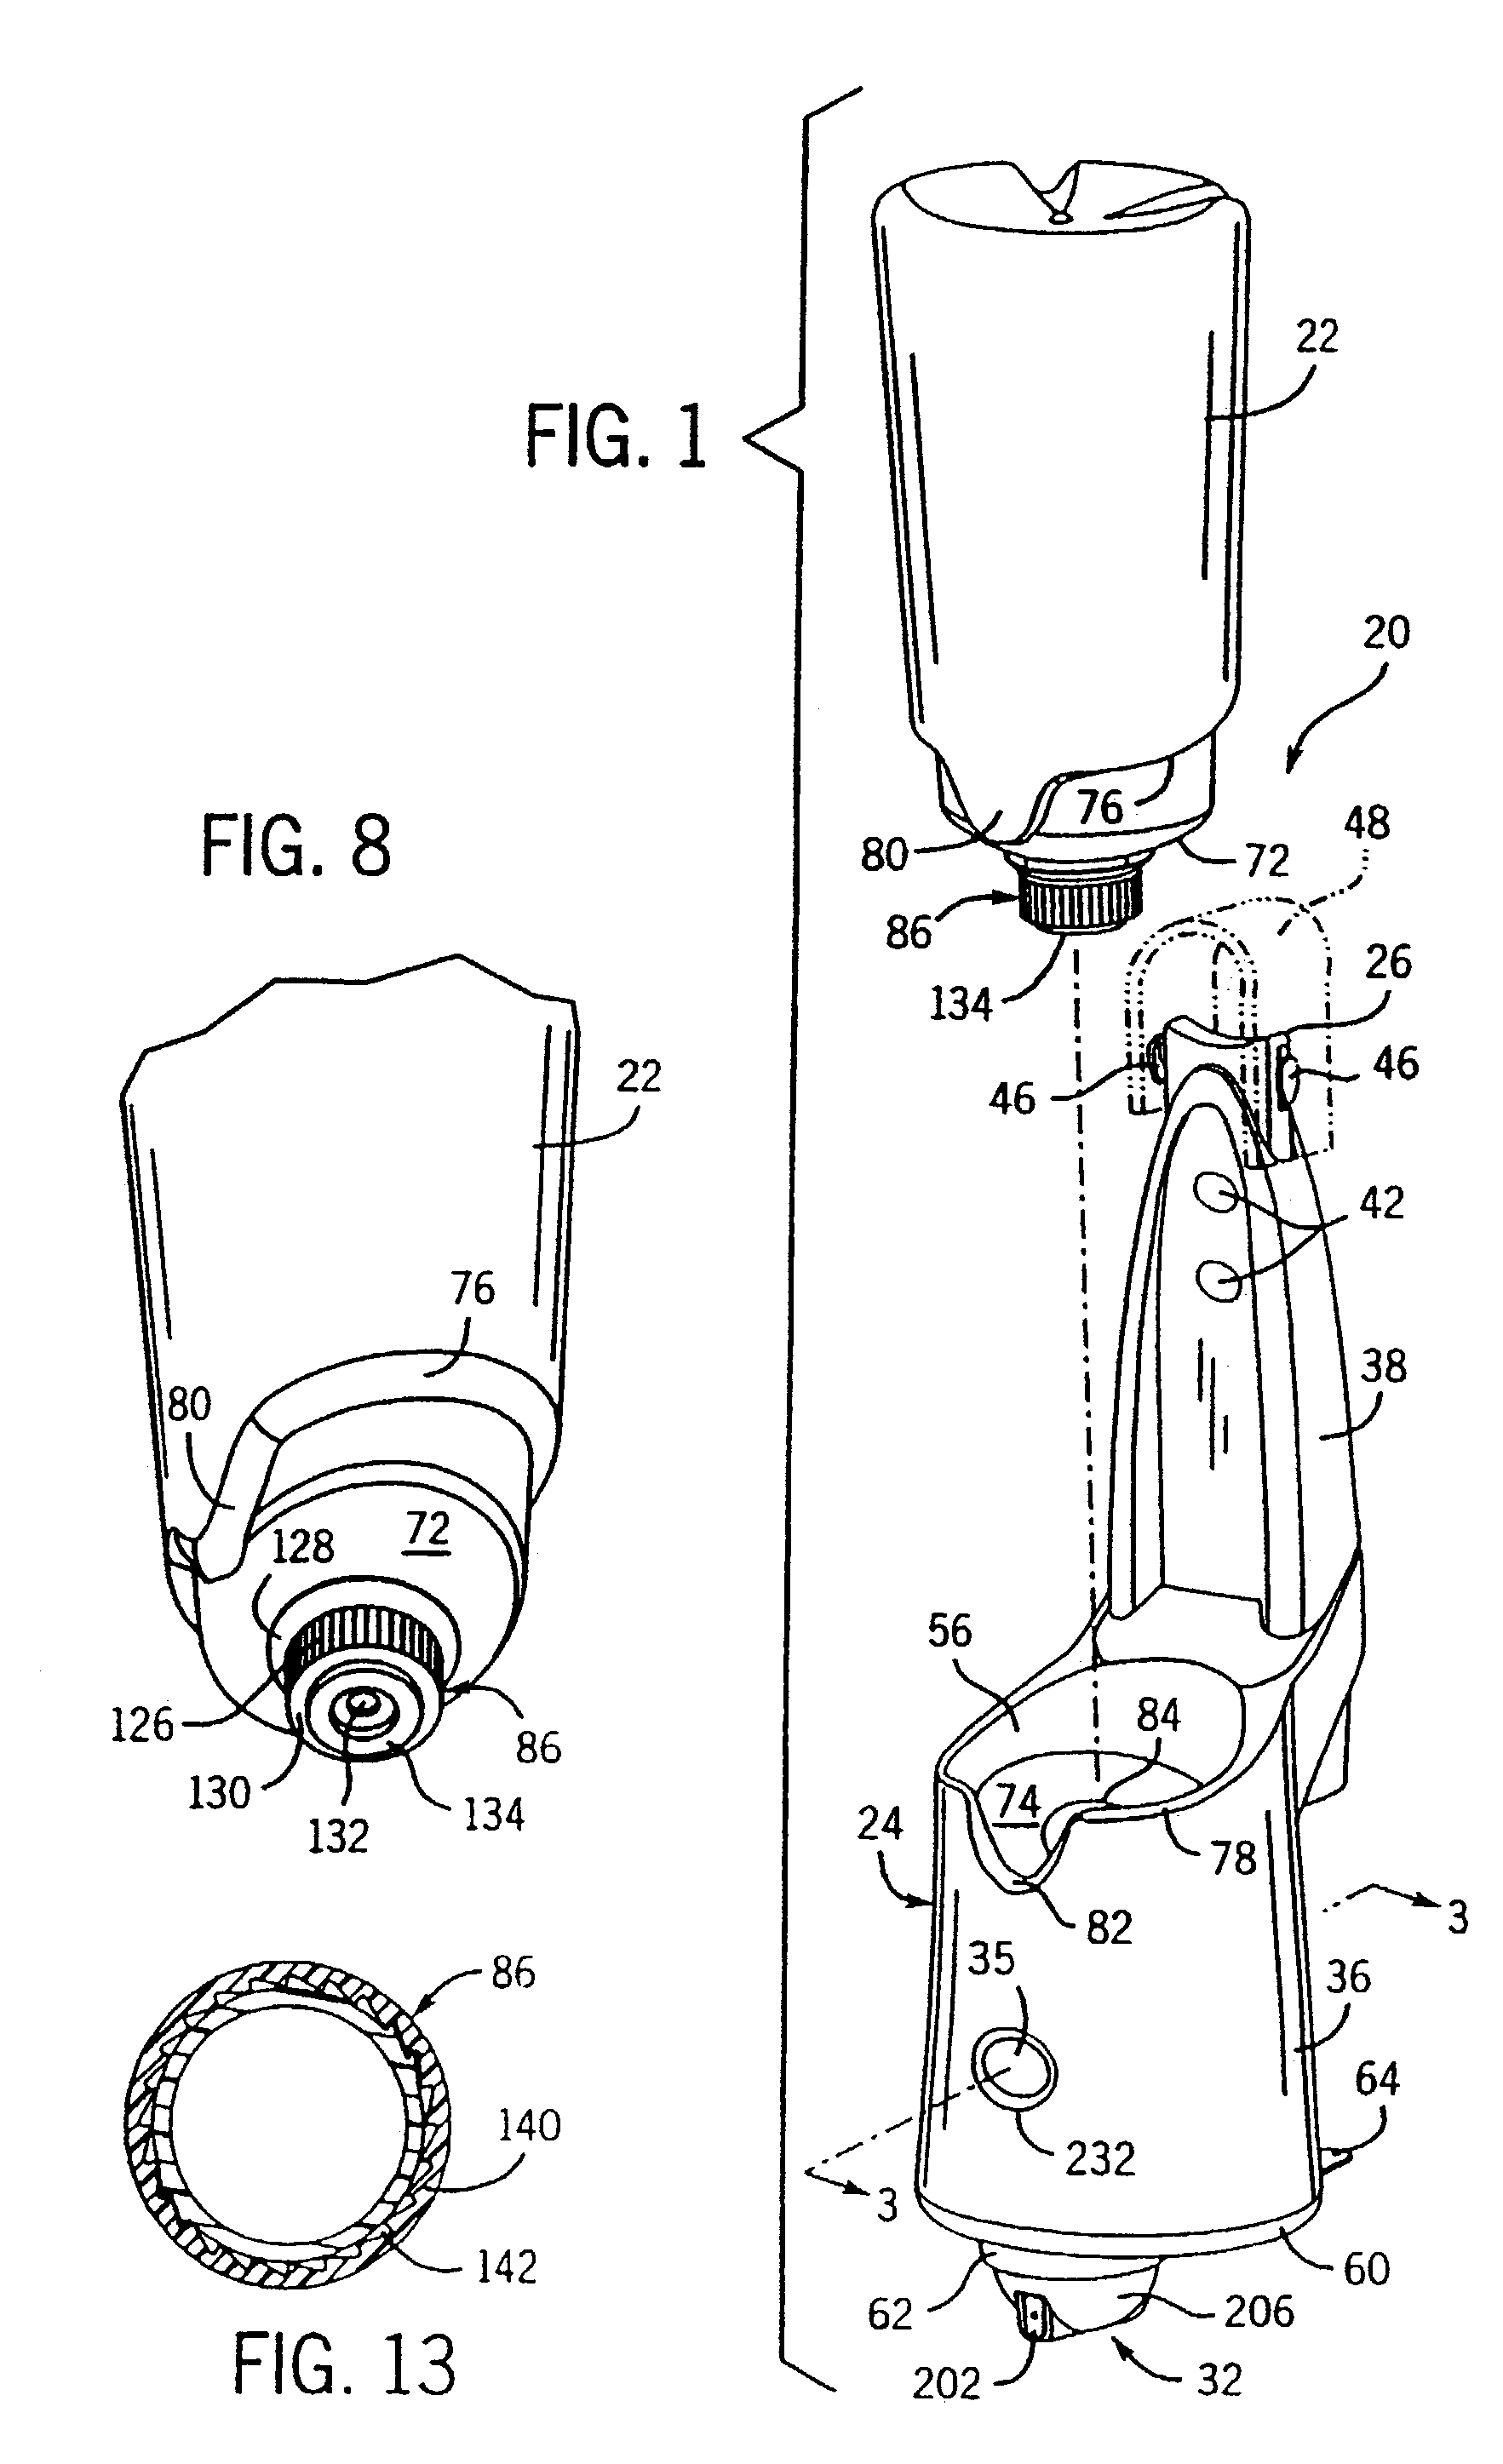 Bottle adapter for dispensing of cleanser from bottle used in an automated cleansing sprayer